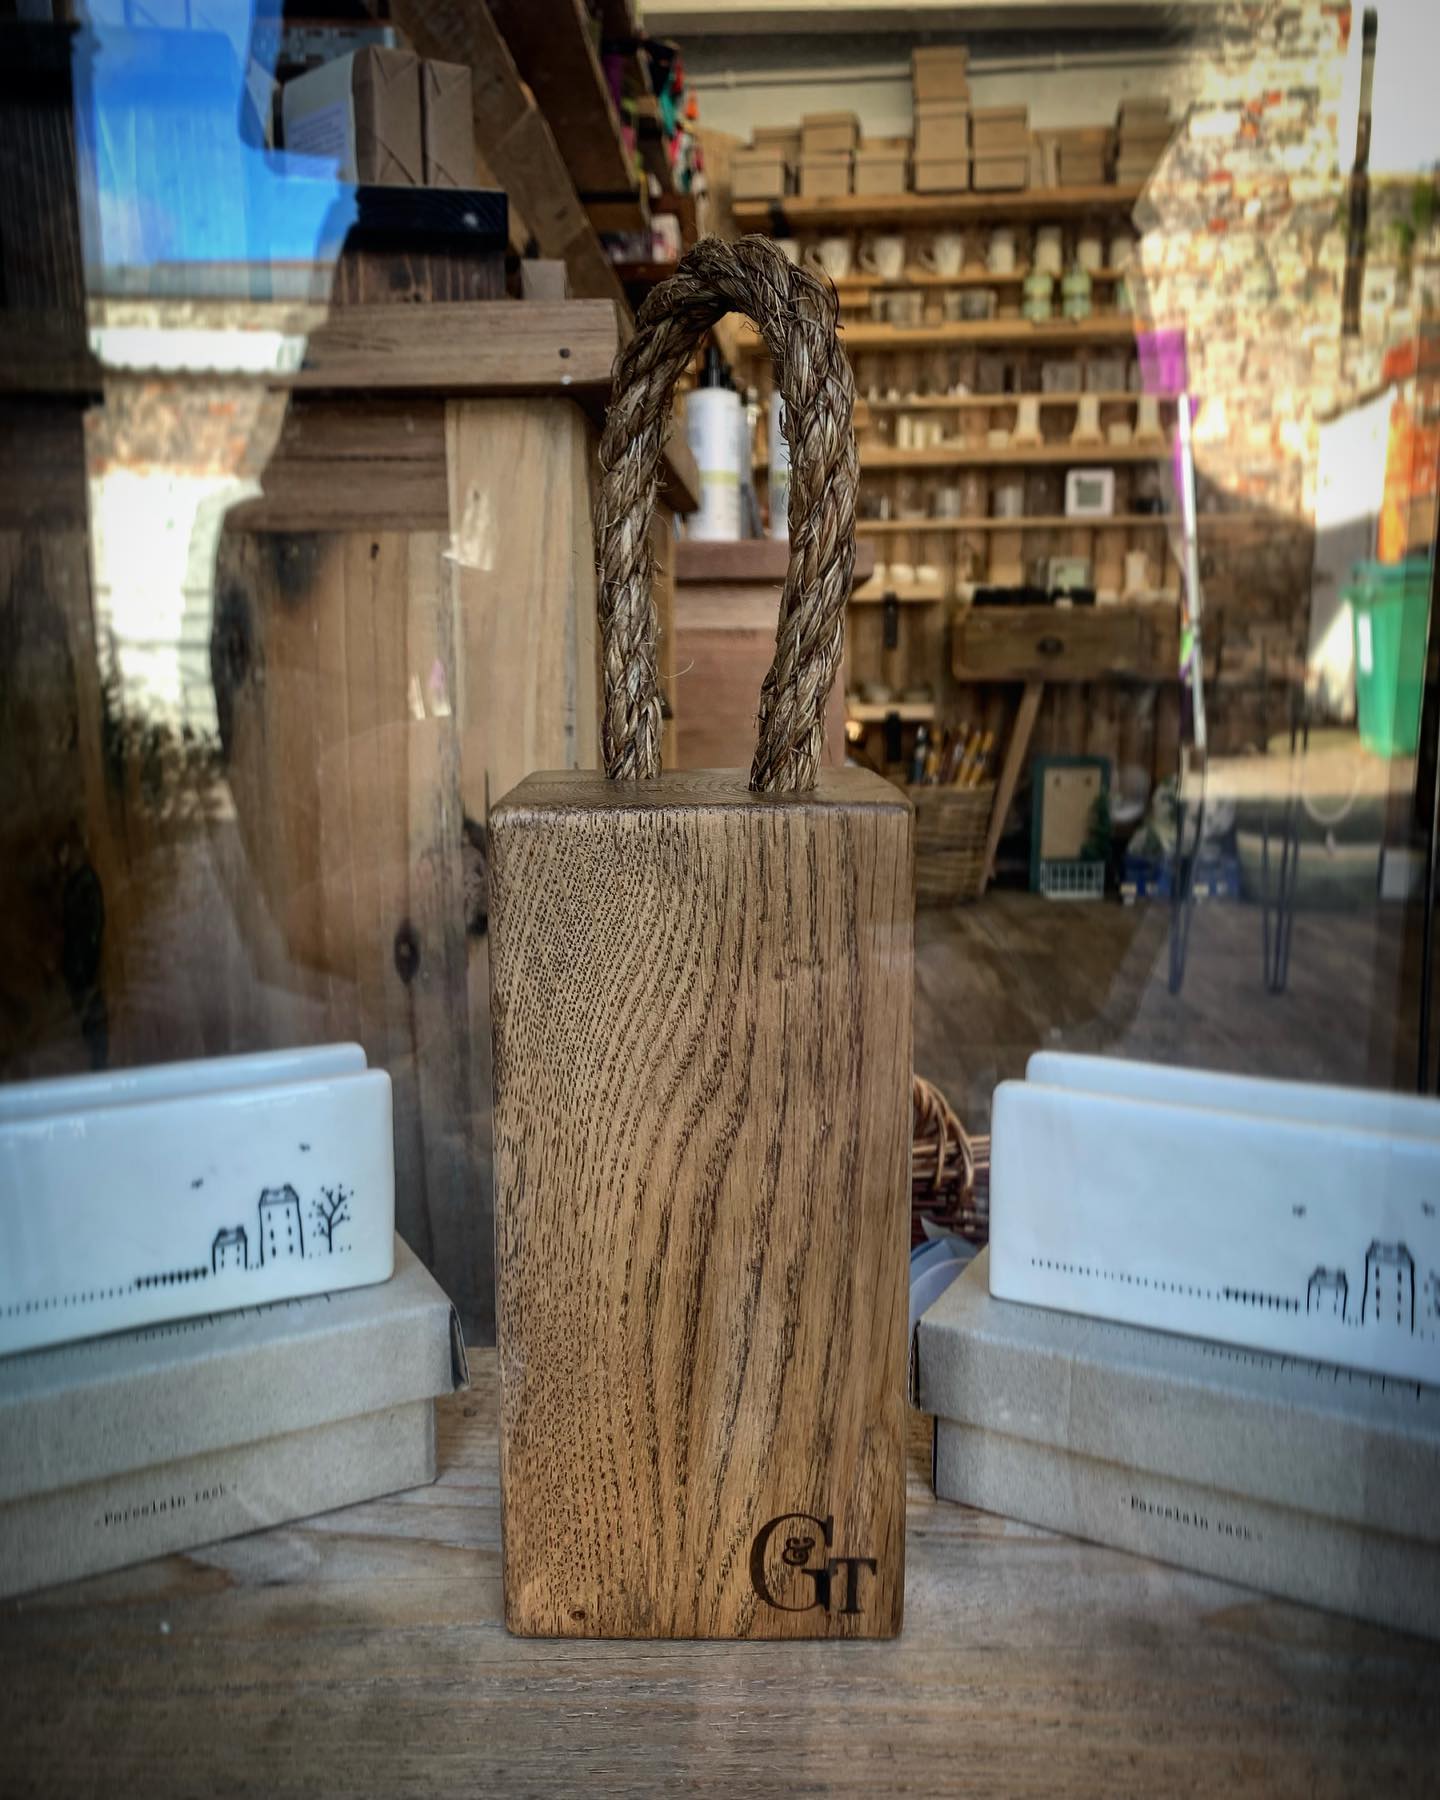 So wonderful to see our oak doorstops in @sageandbumble today! What a beautiful shop! And it smells divine! Super chuffed that they’re now stocking some G and T products ️#newstockist #giftshop #wells #shopsmall #shopindependent #handcrafted #homewares #unique #crafted #localhighstreet #gingerandtweed